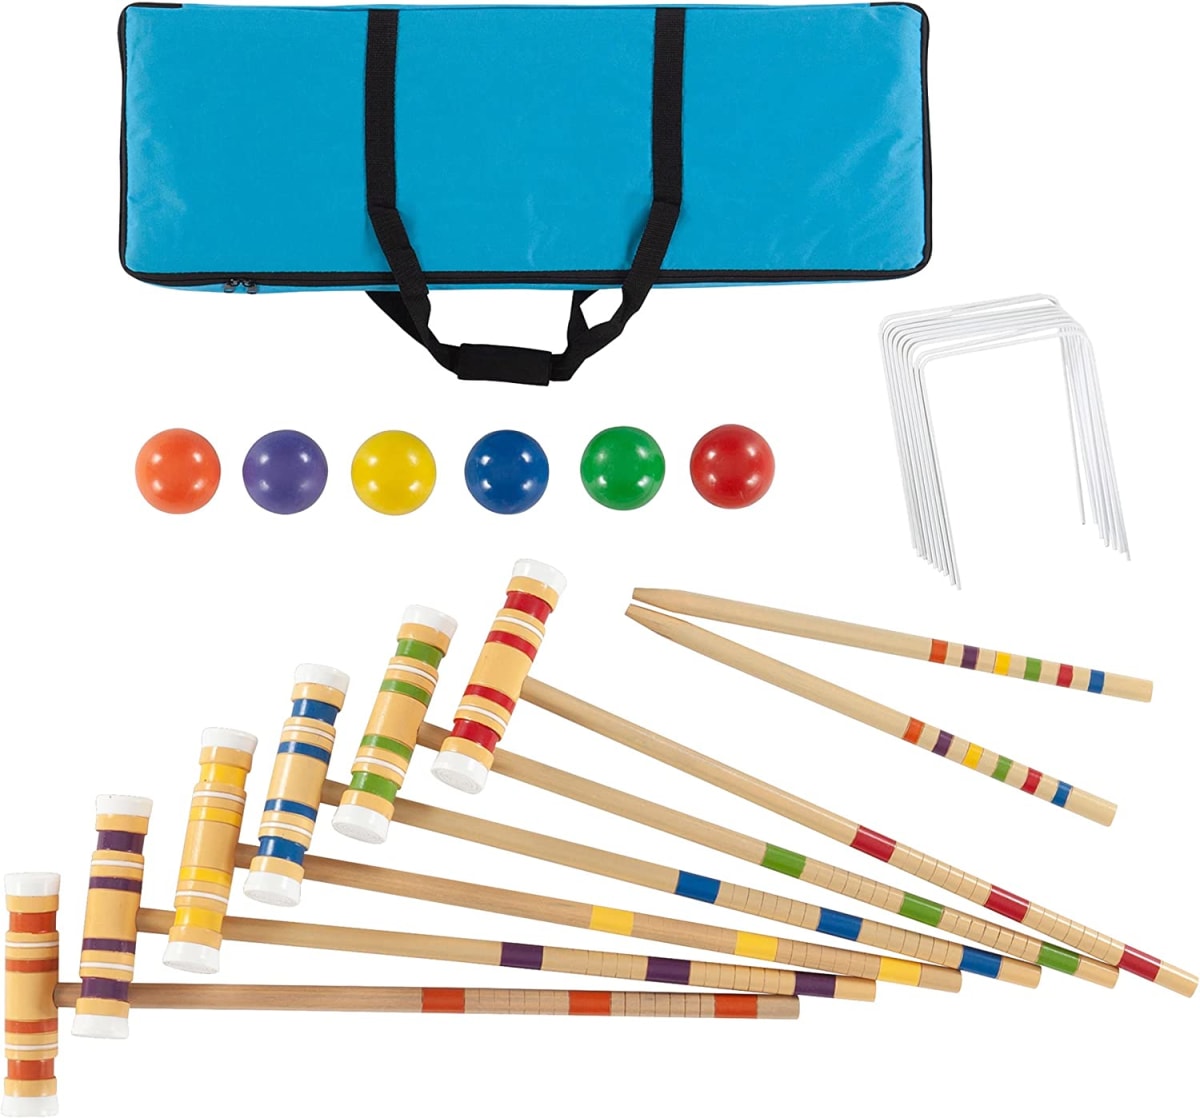 Wooden Outdoor Deluxe Sports Set with Carrying Case